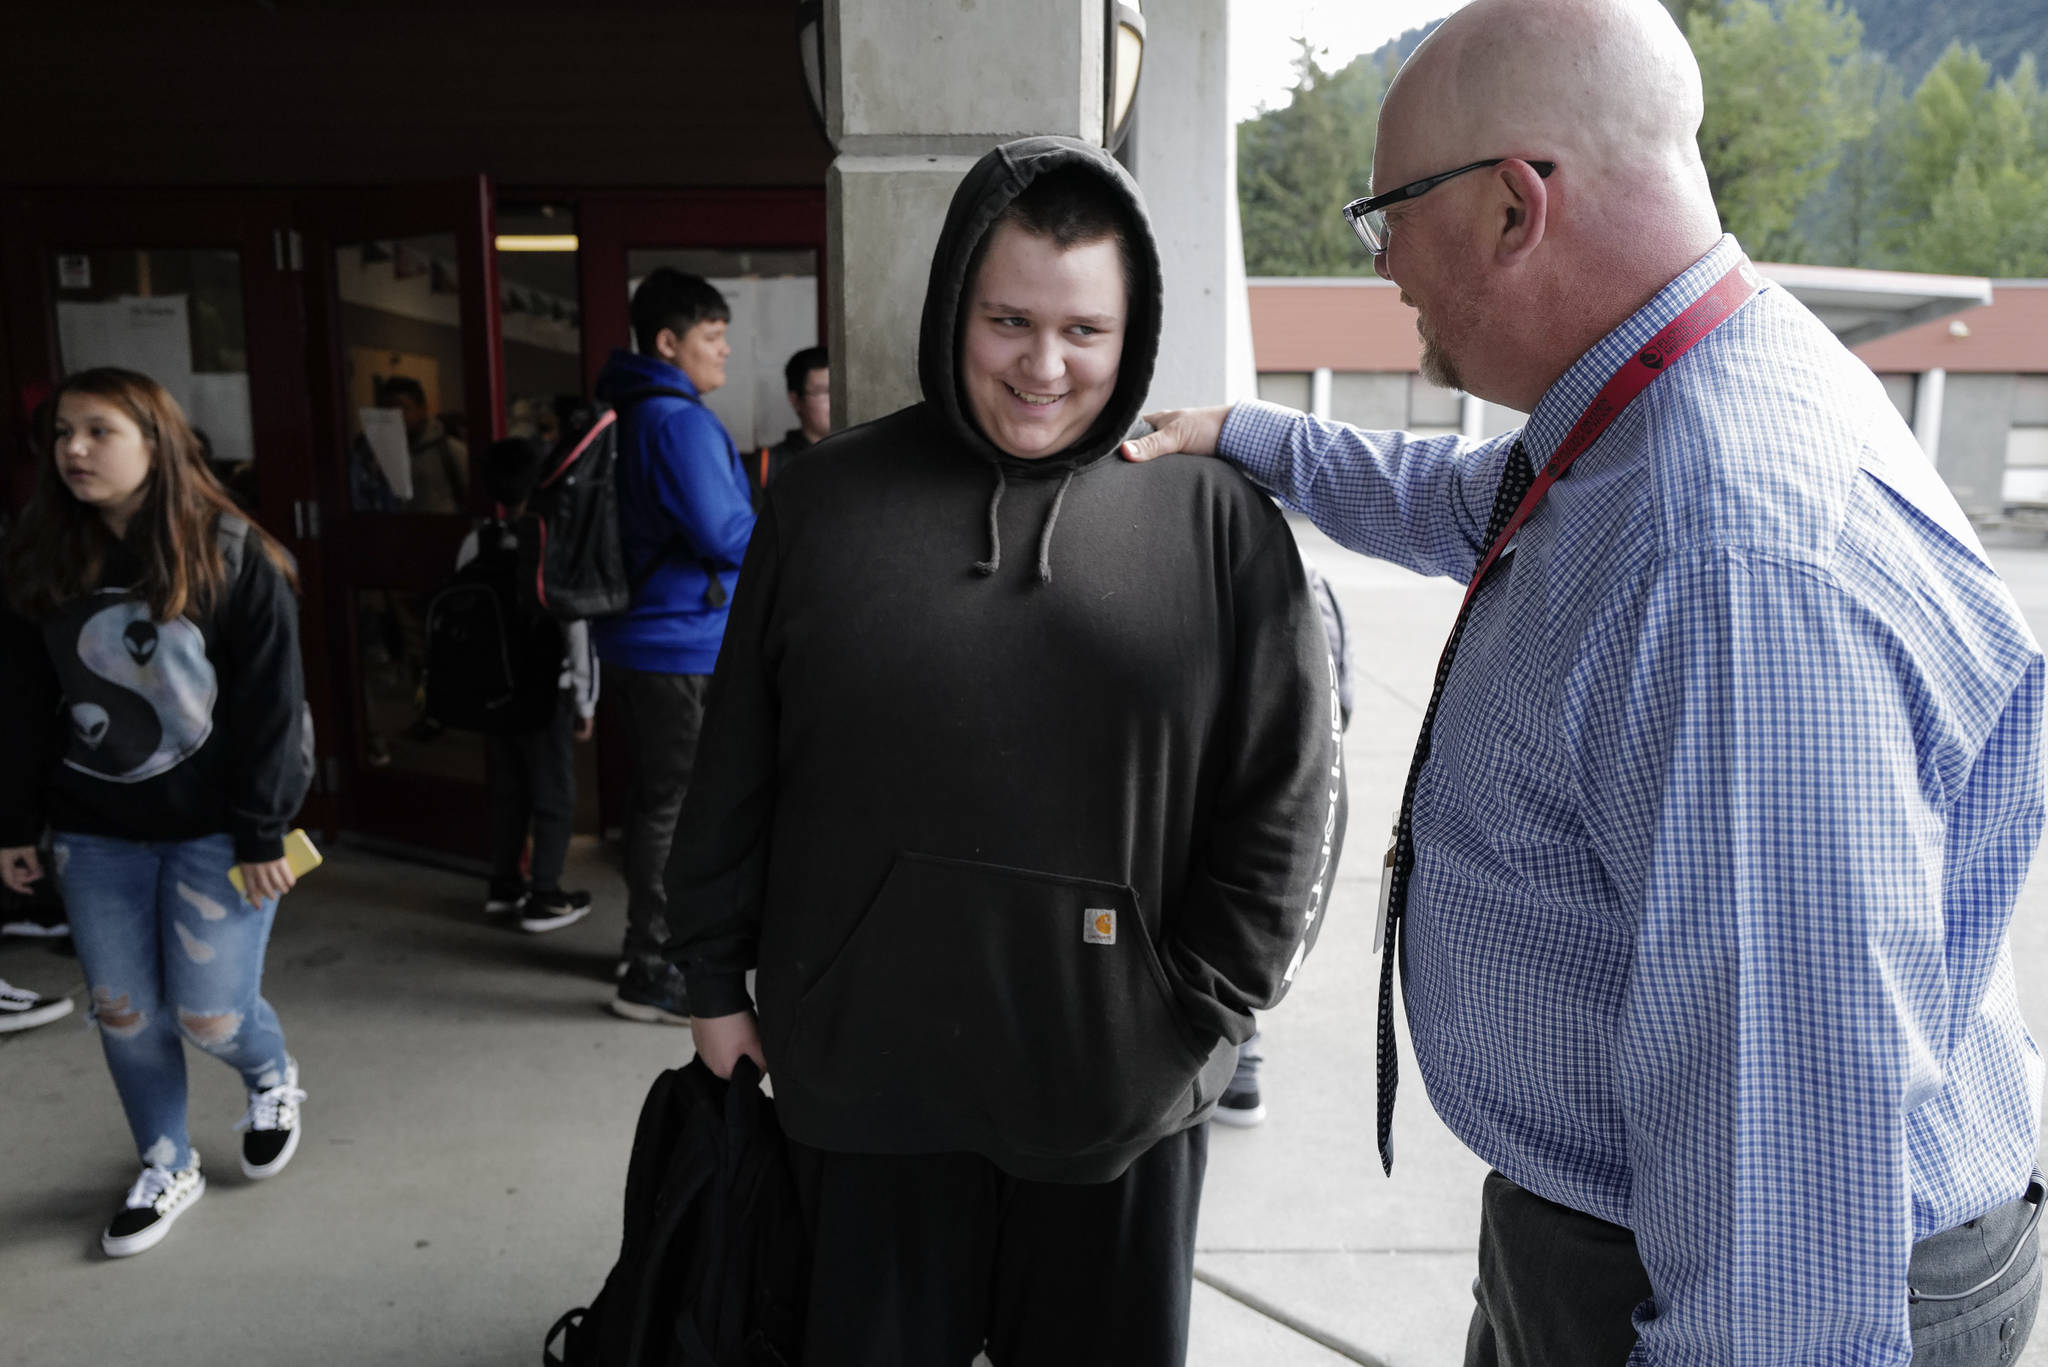 Principal Jim Thompson greets eight-grader Dalton Bell on the first day of school at Floyd Dryden Middle School on Monday, Aug. 19, 2019. (Michael Penn | Juneau Empire)